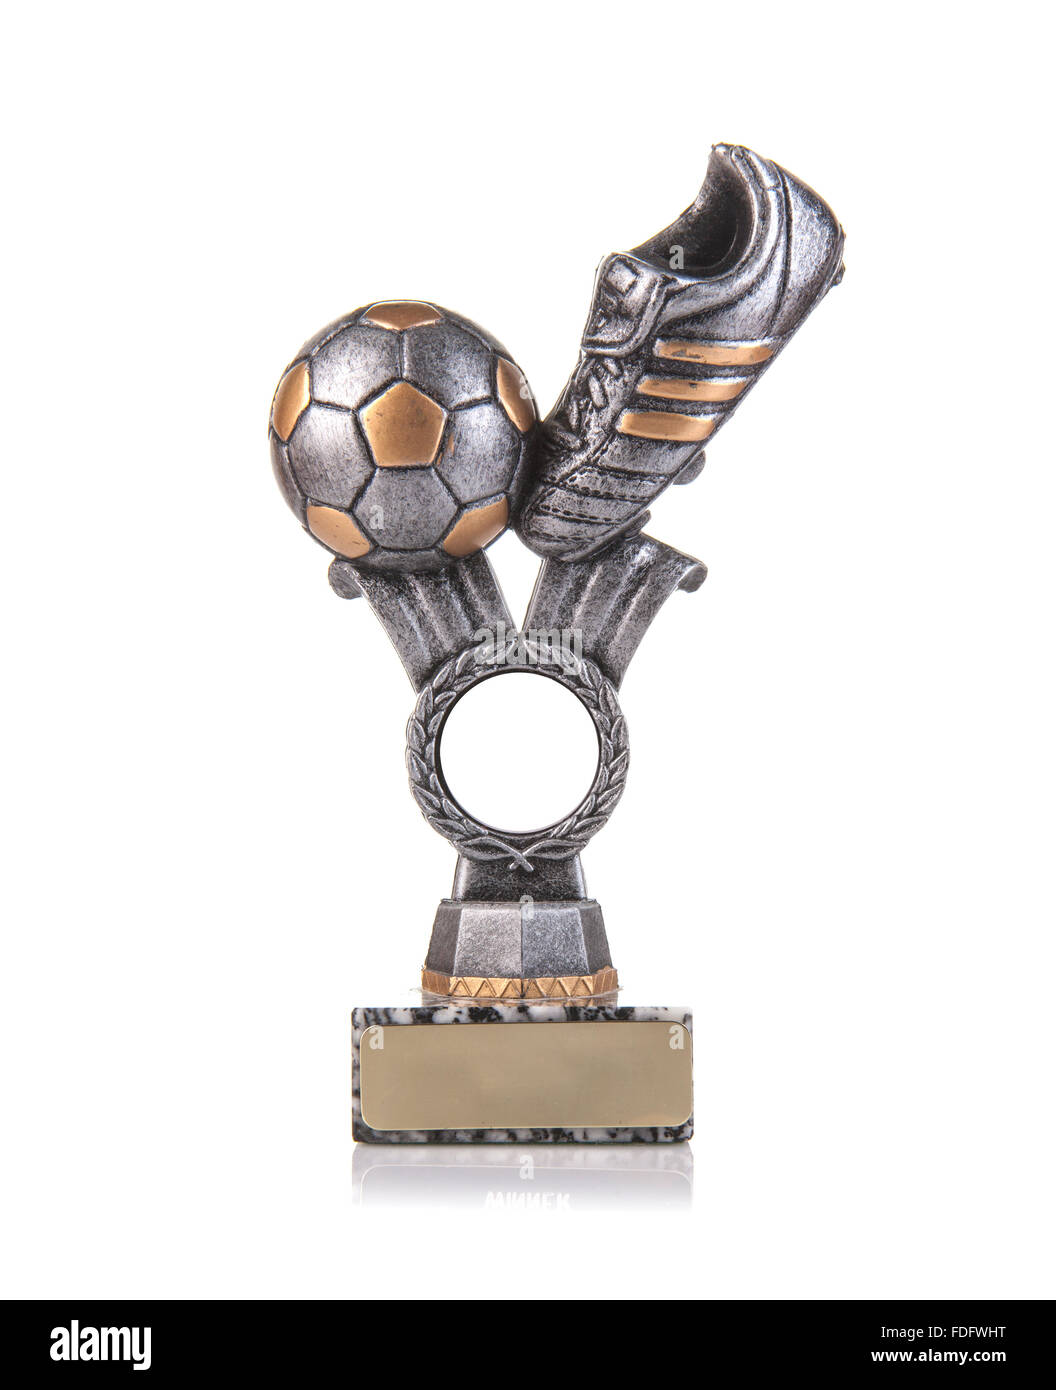 football trophy on a white background Stock Photo